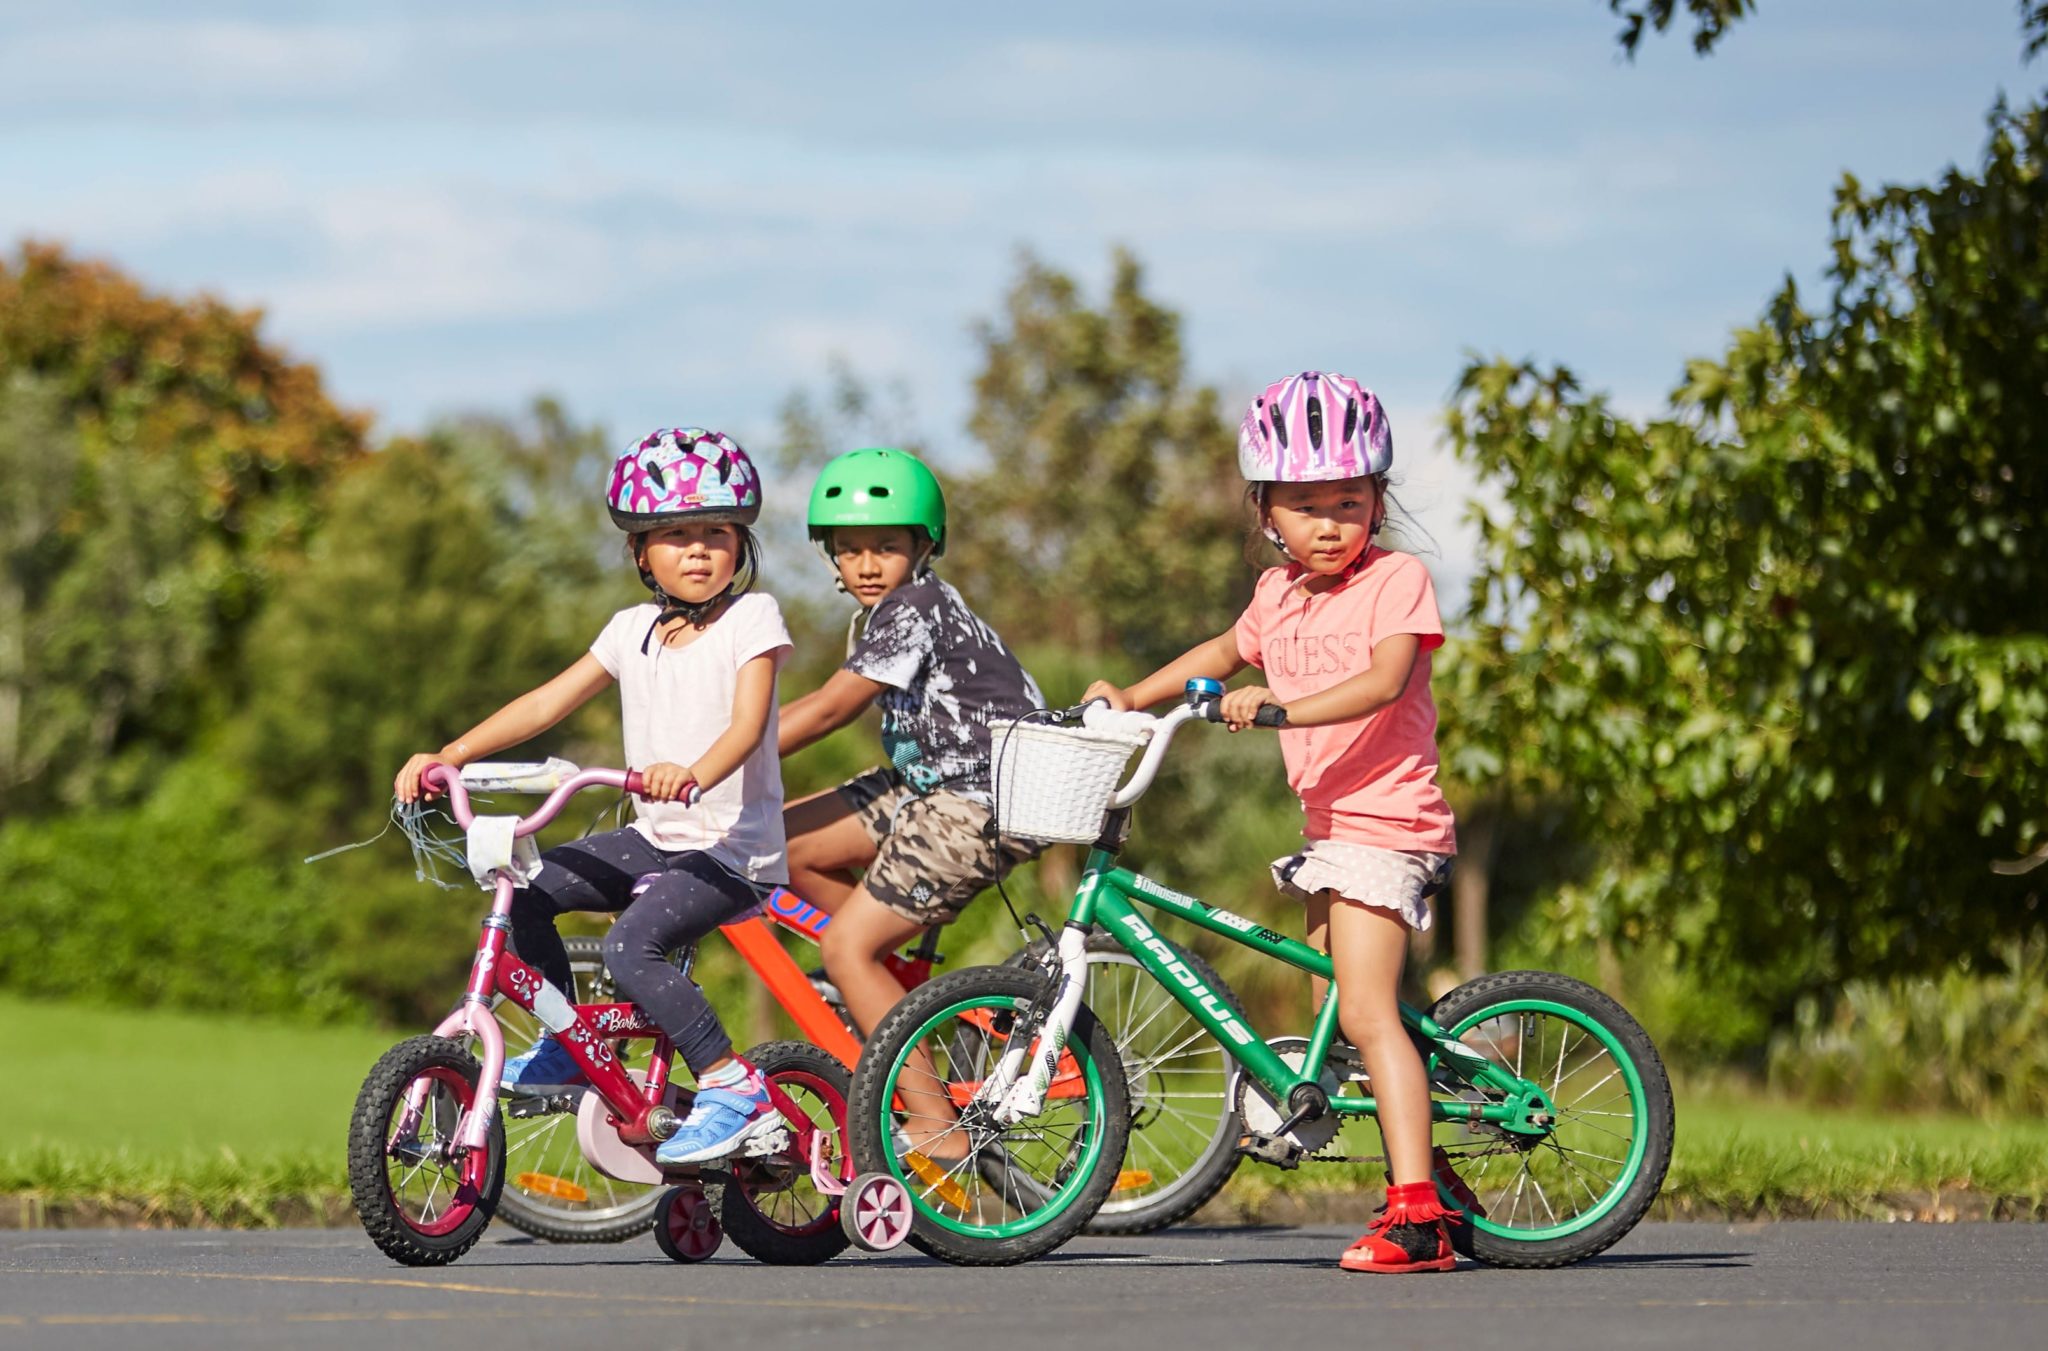 Children riding Bicycles. Friends teens and Kids Ride Bikes. The children ride bikes